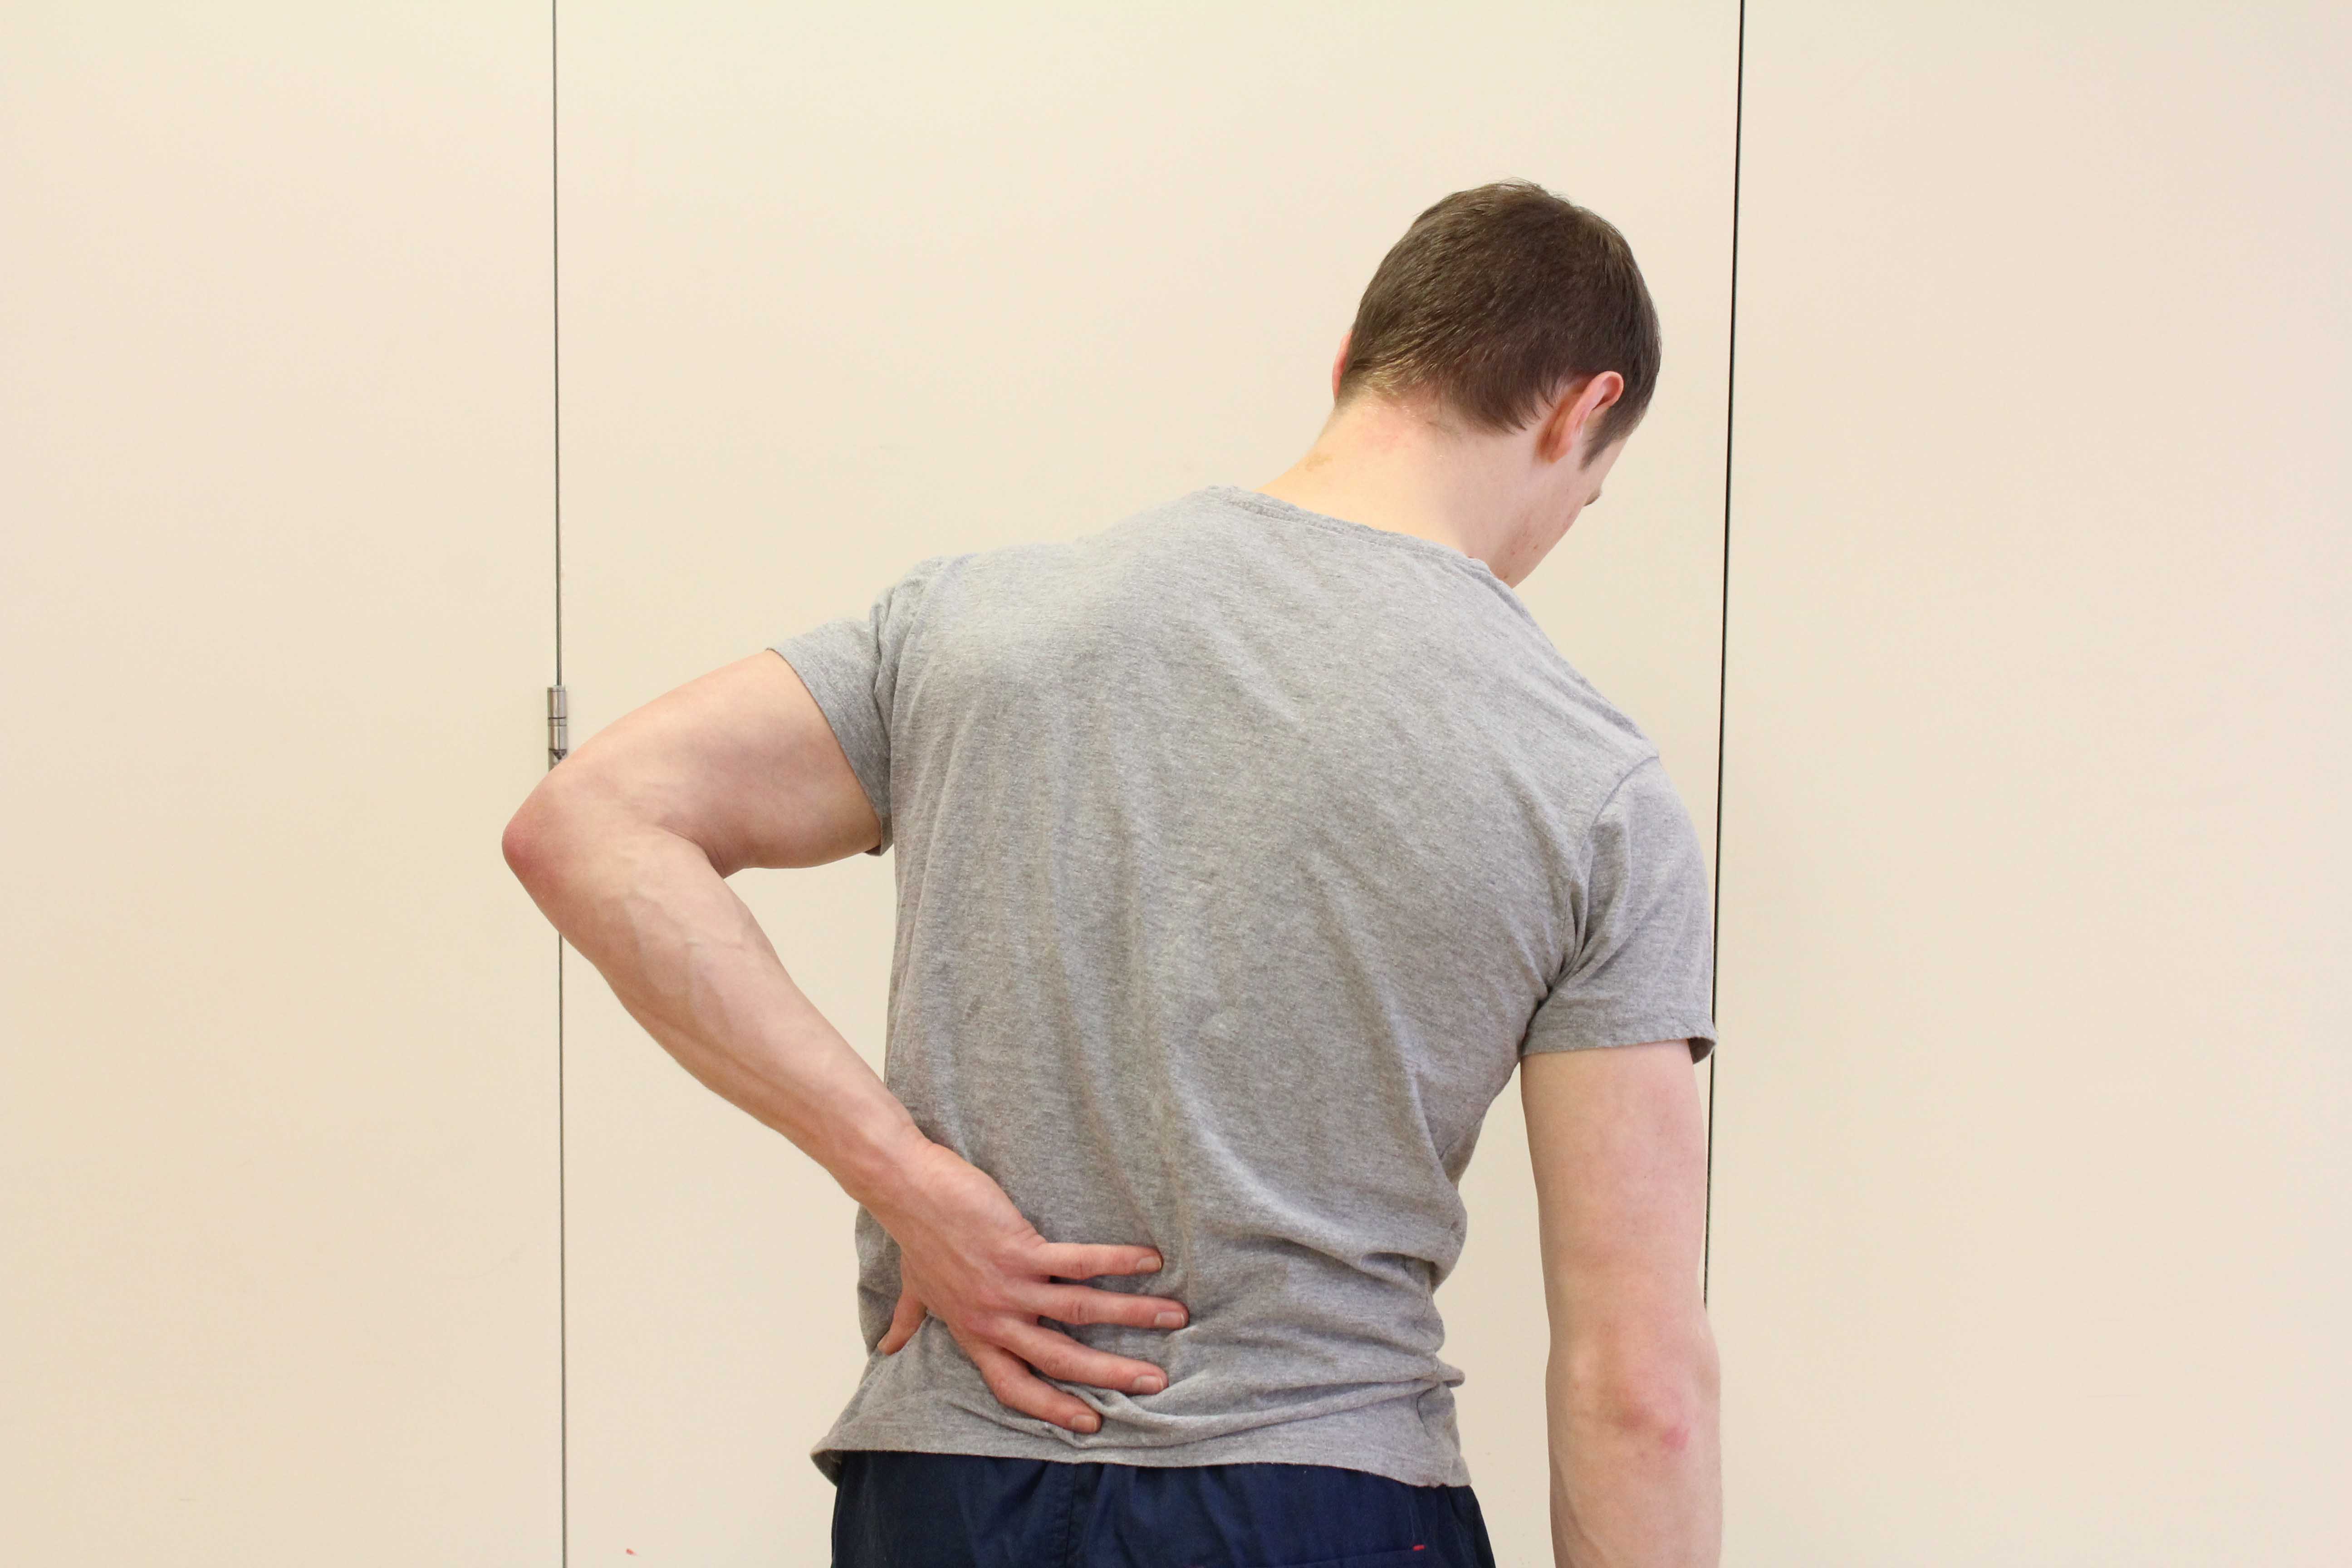 Lower back pain derived from structural and connective tissue misalignment